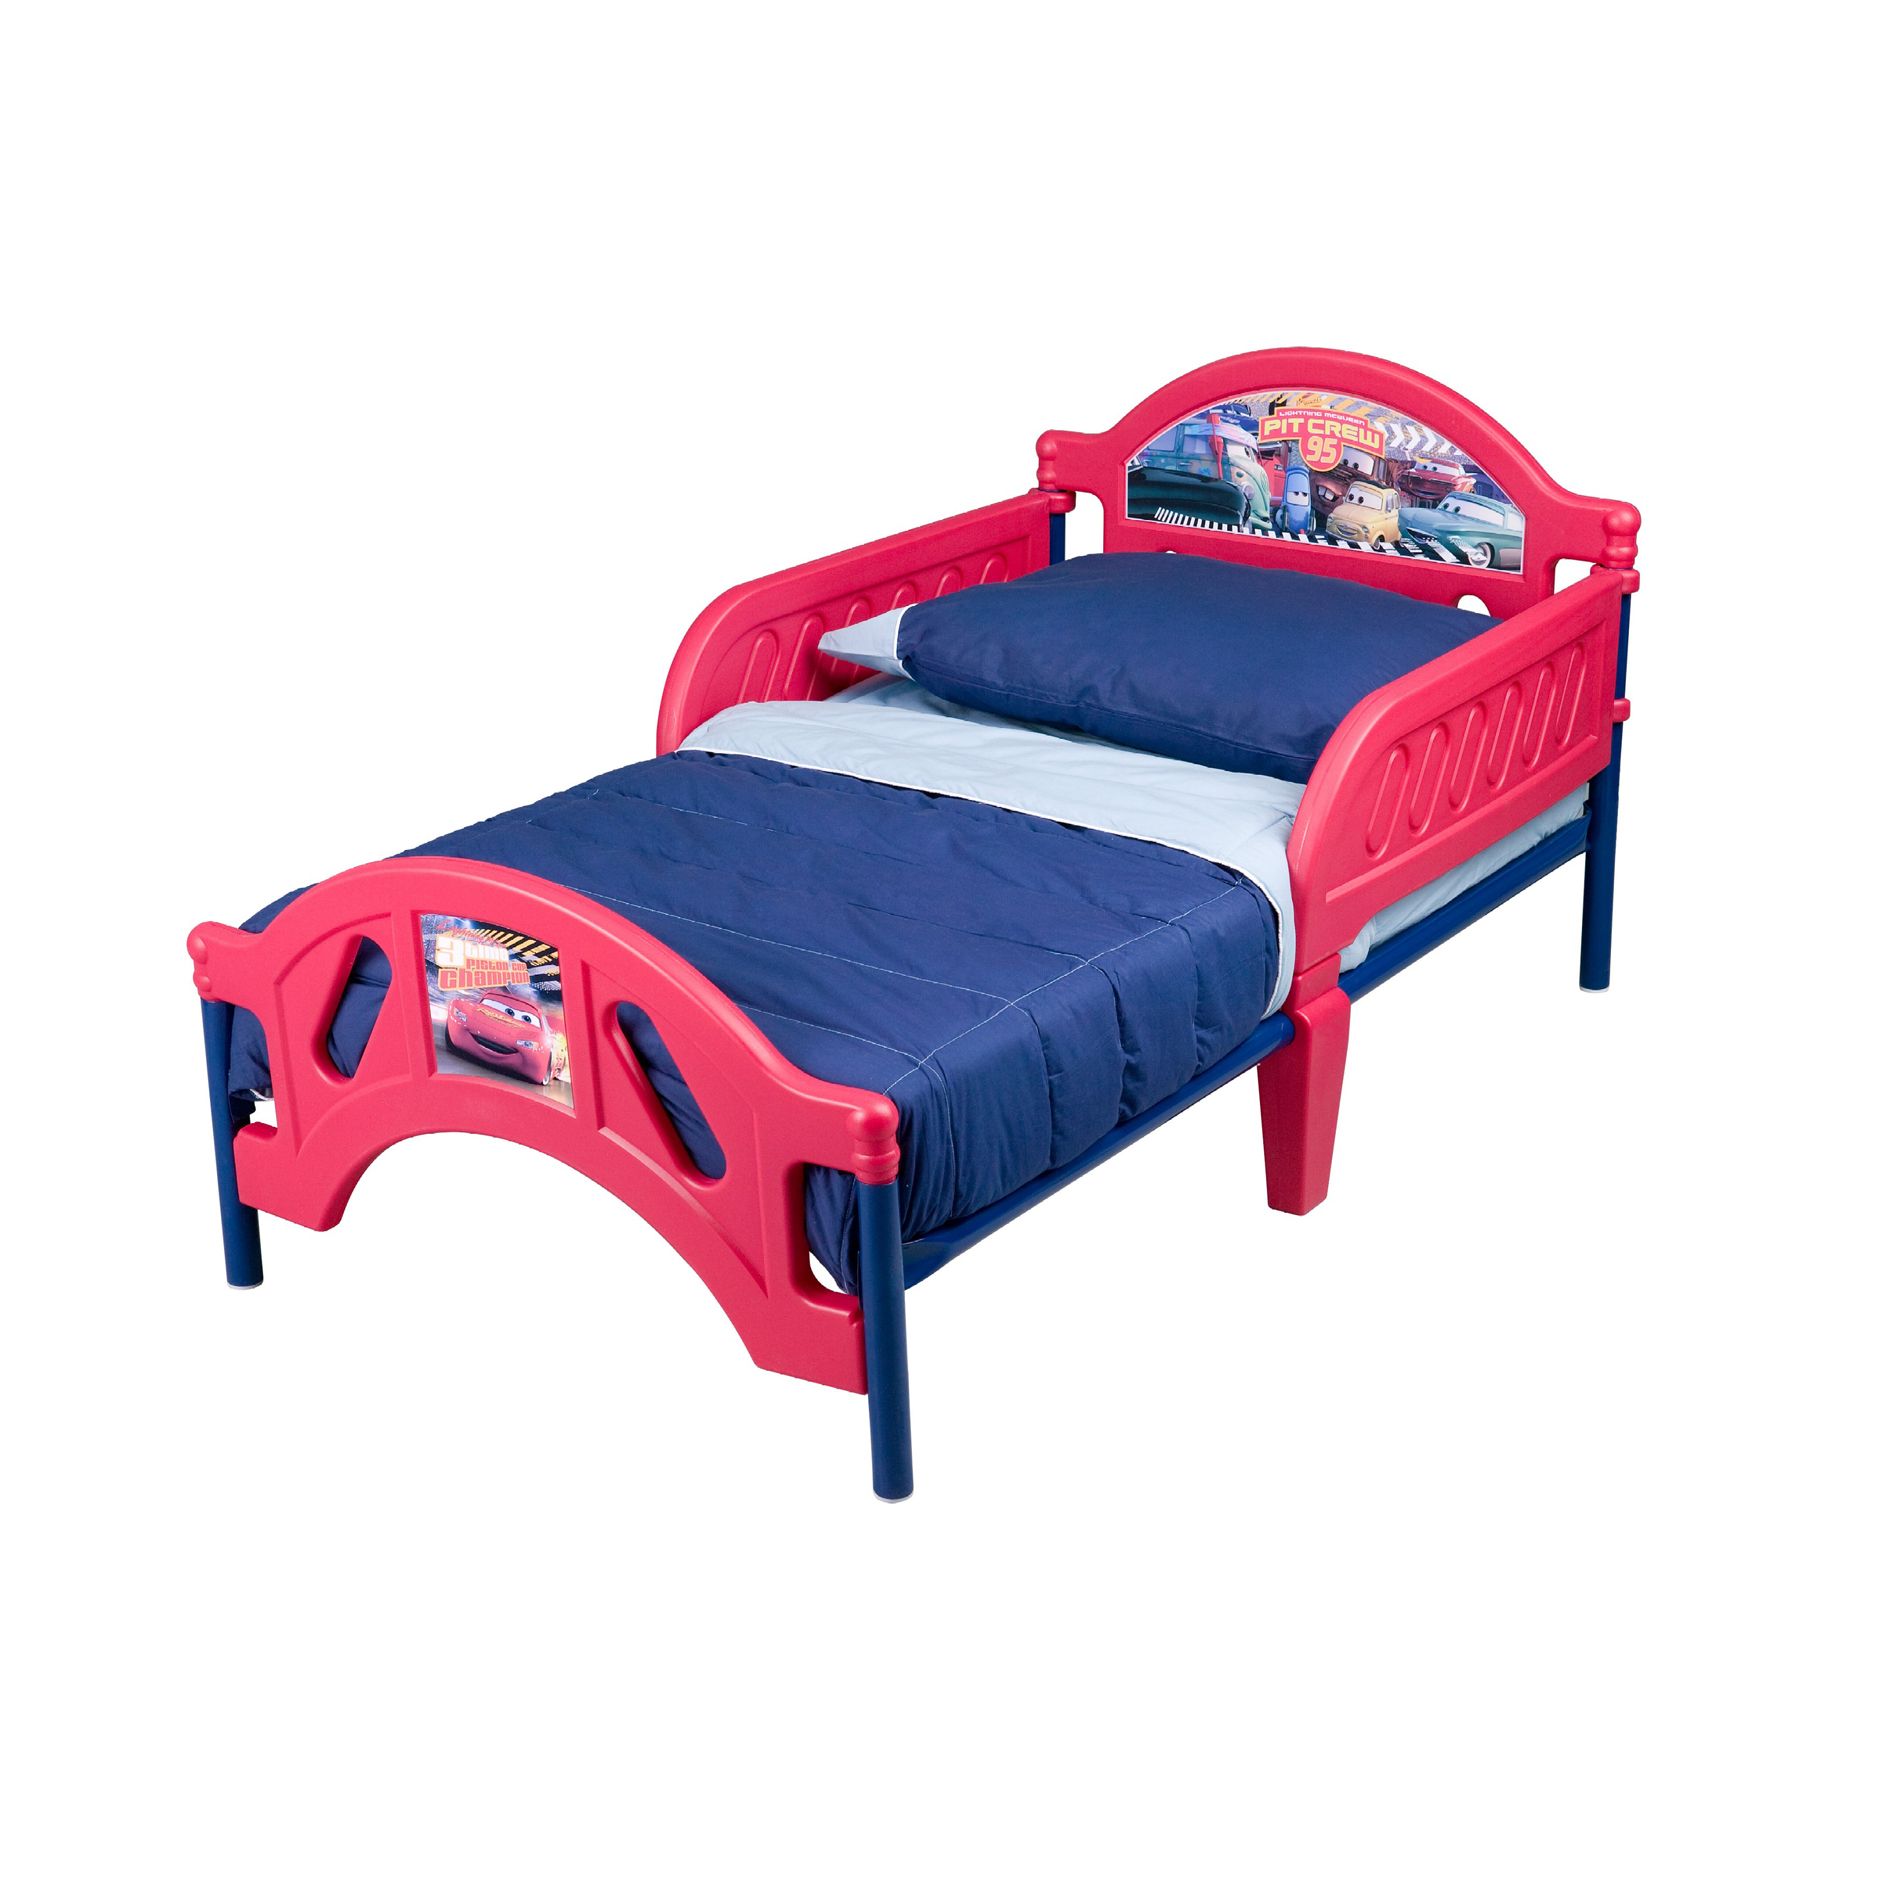 0080213010034 - CARS TODDLER BED